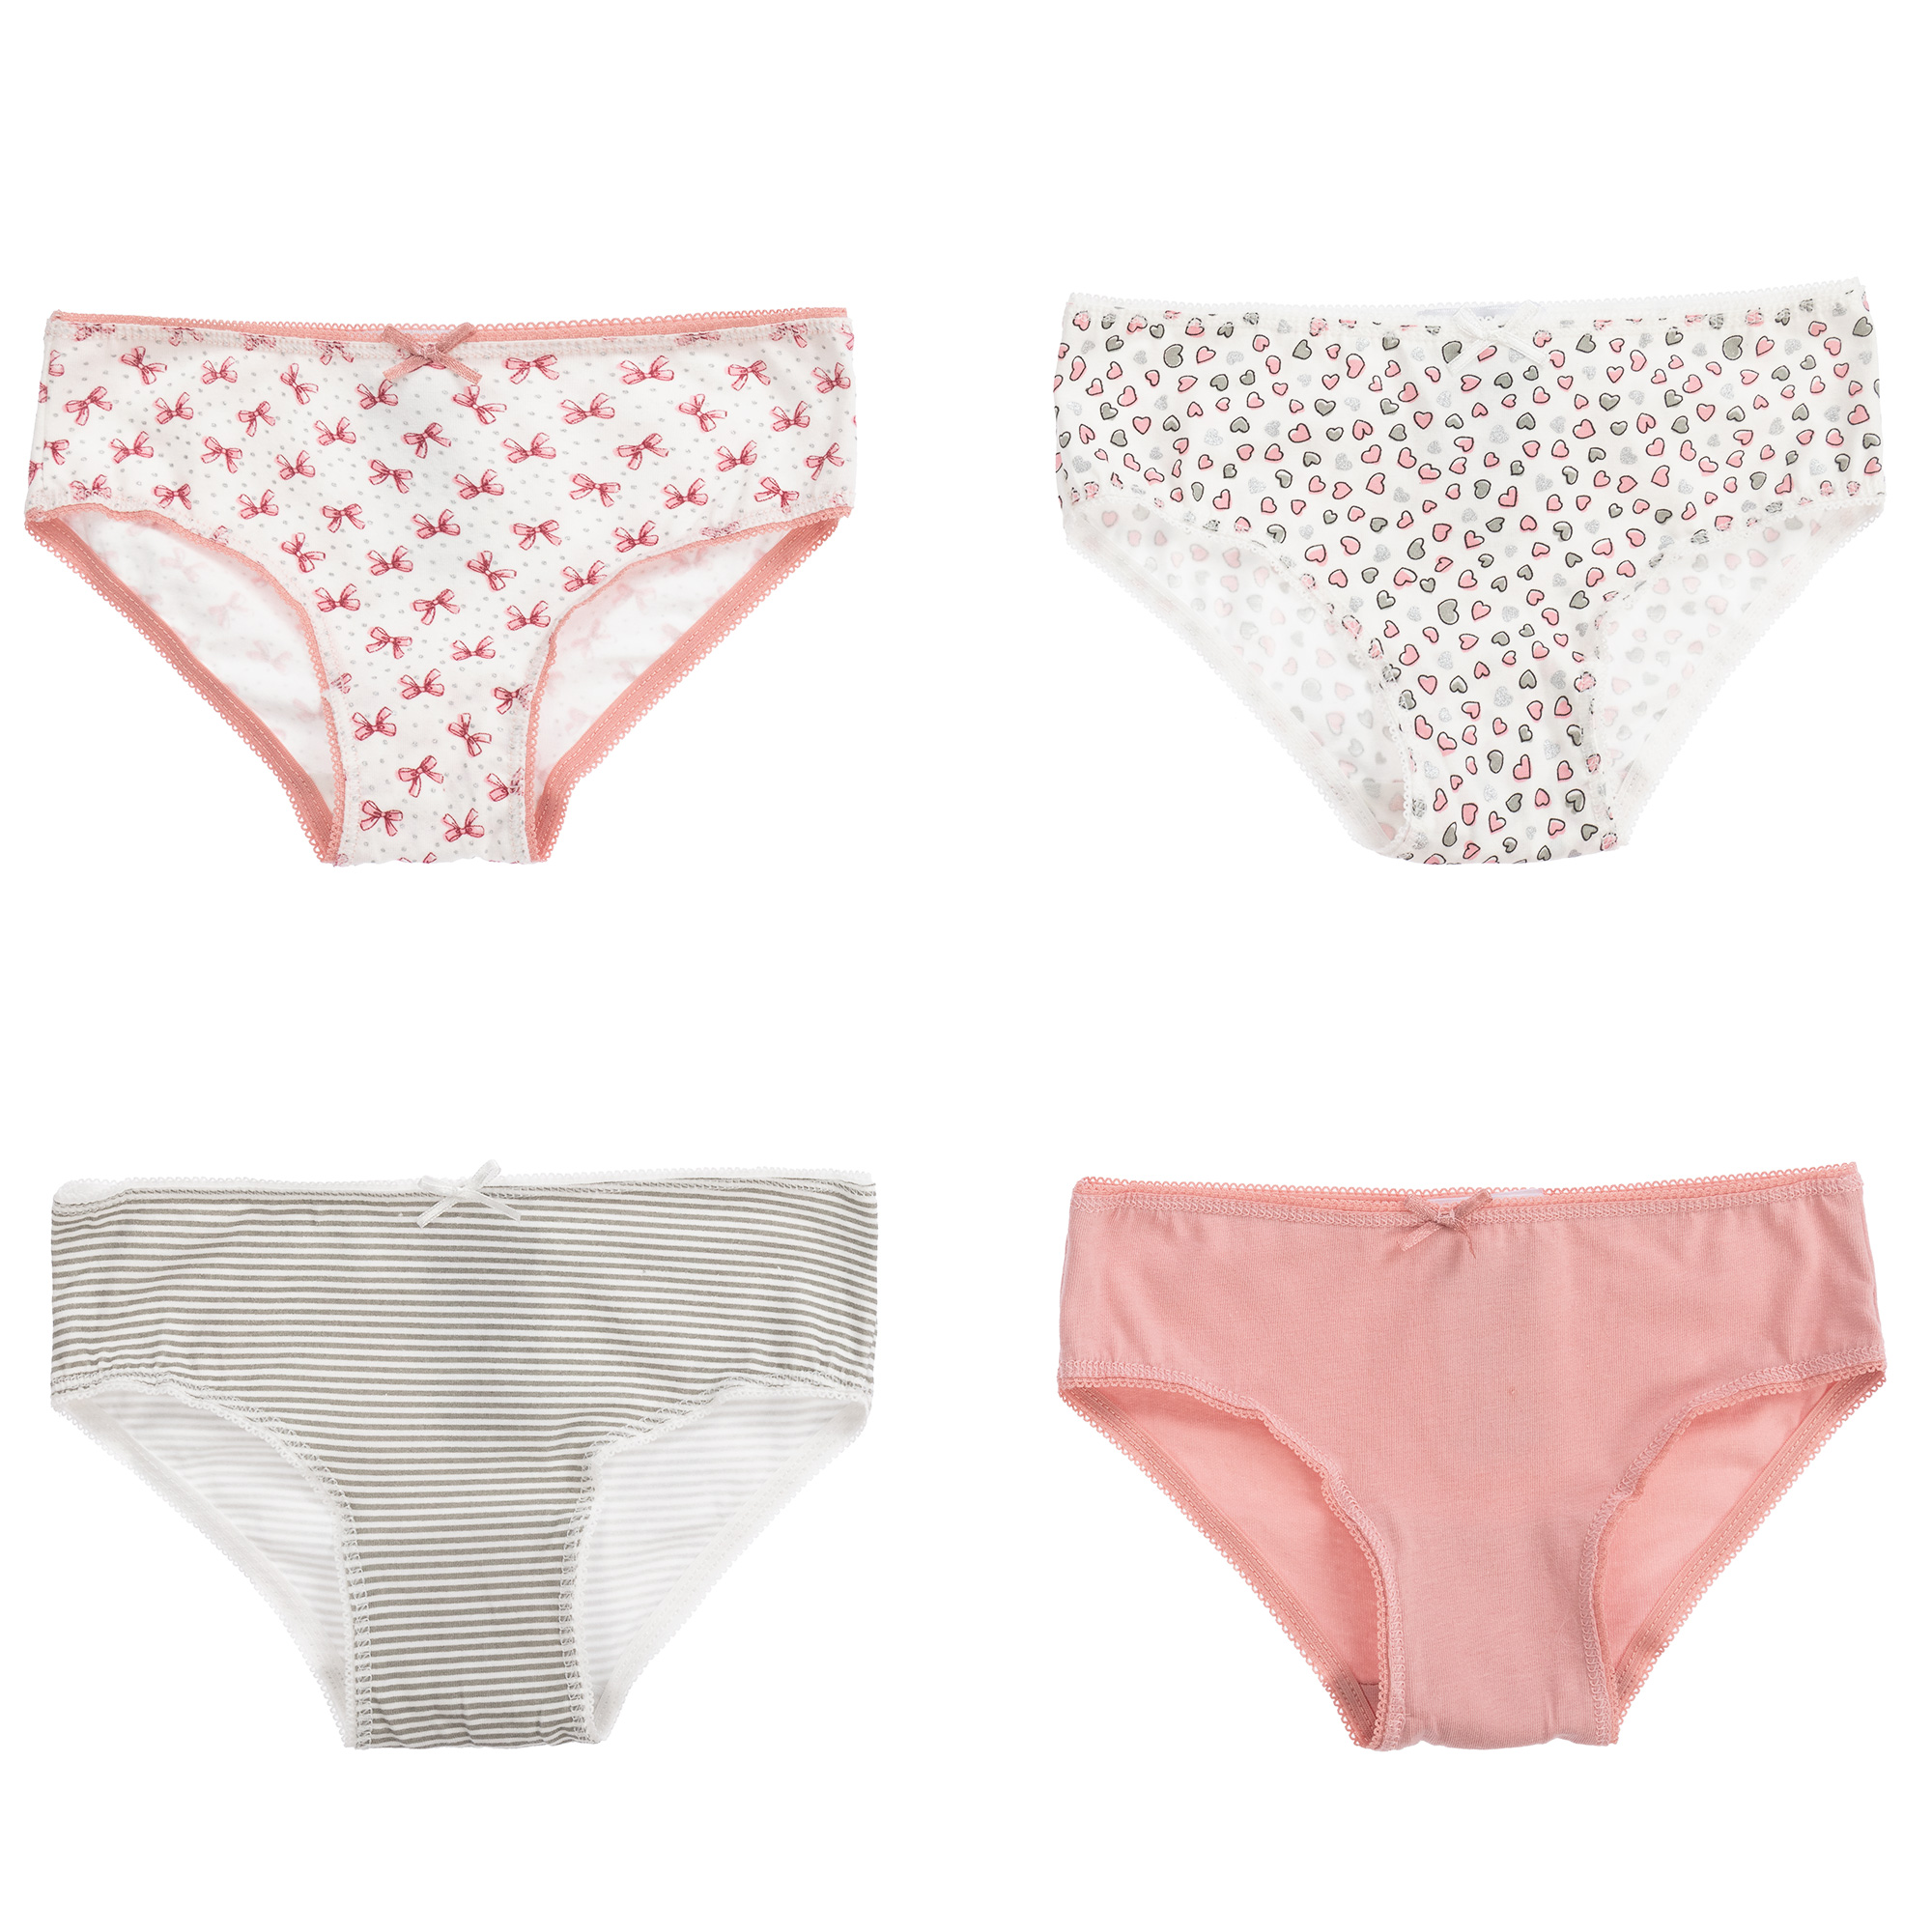 Mayoral Pink Cotton Knickers (4 Pack)